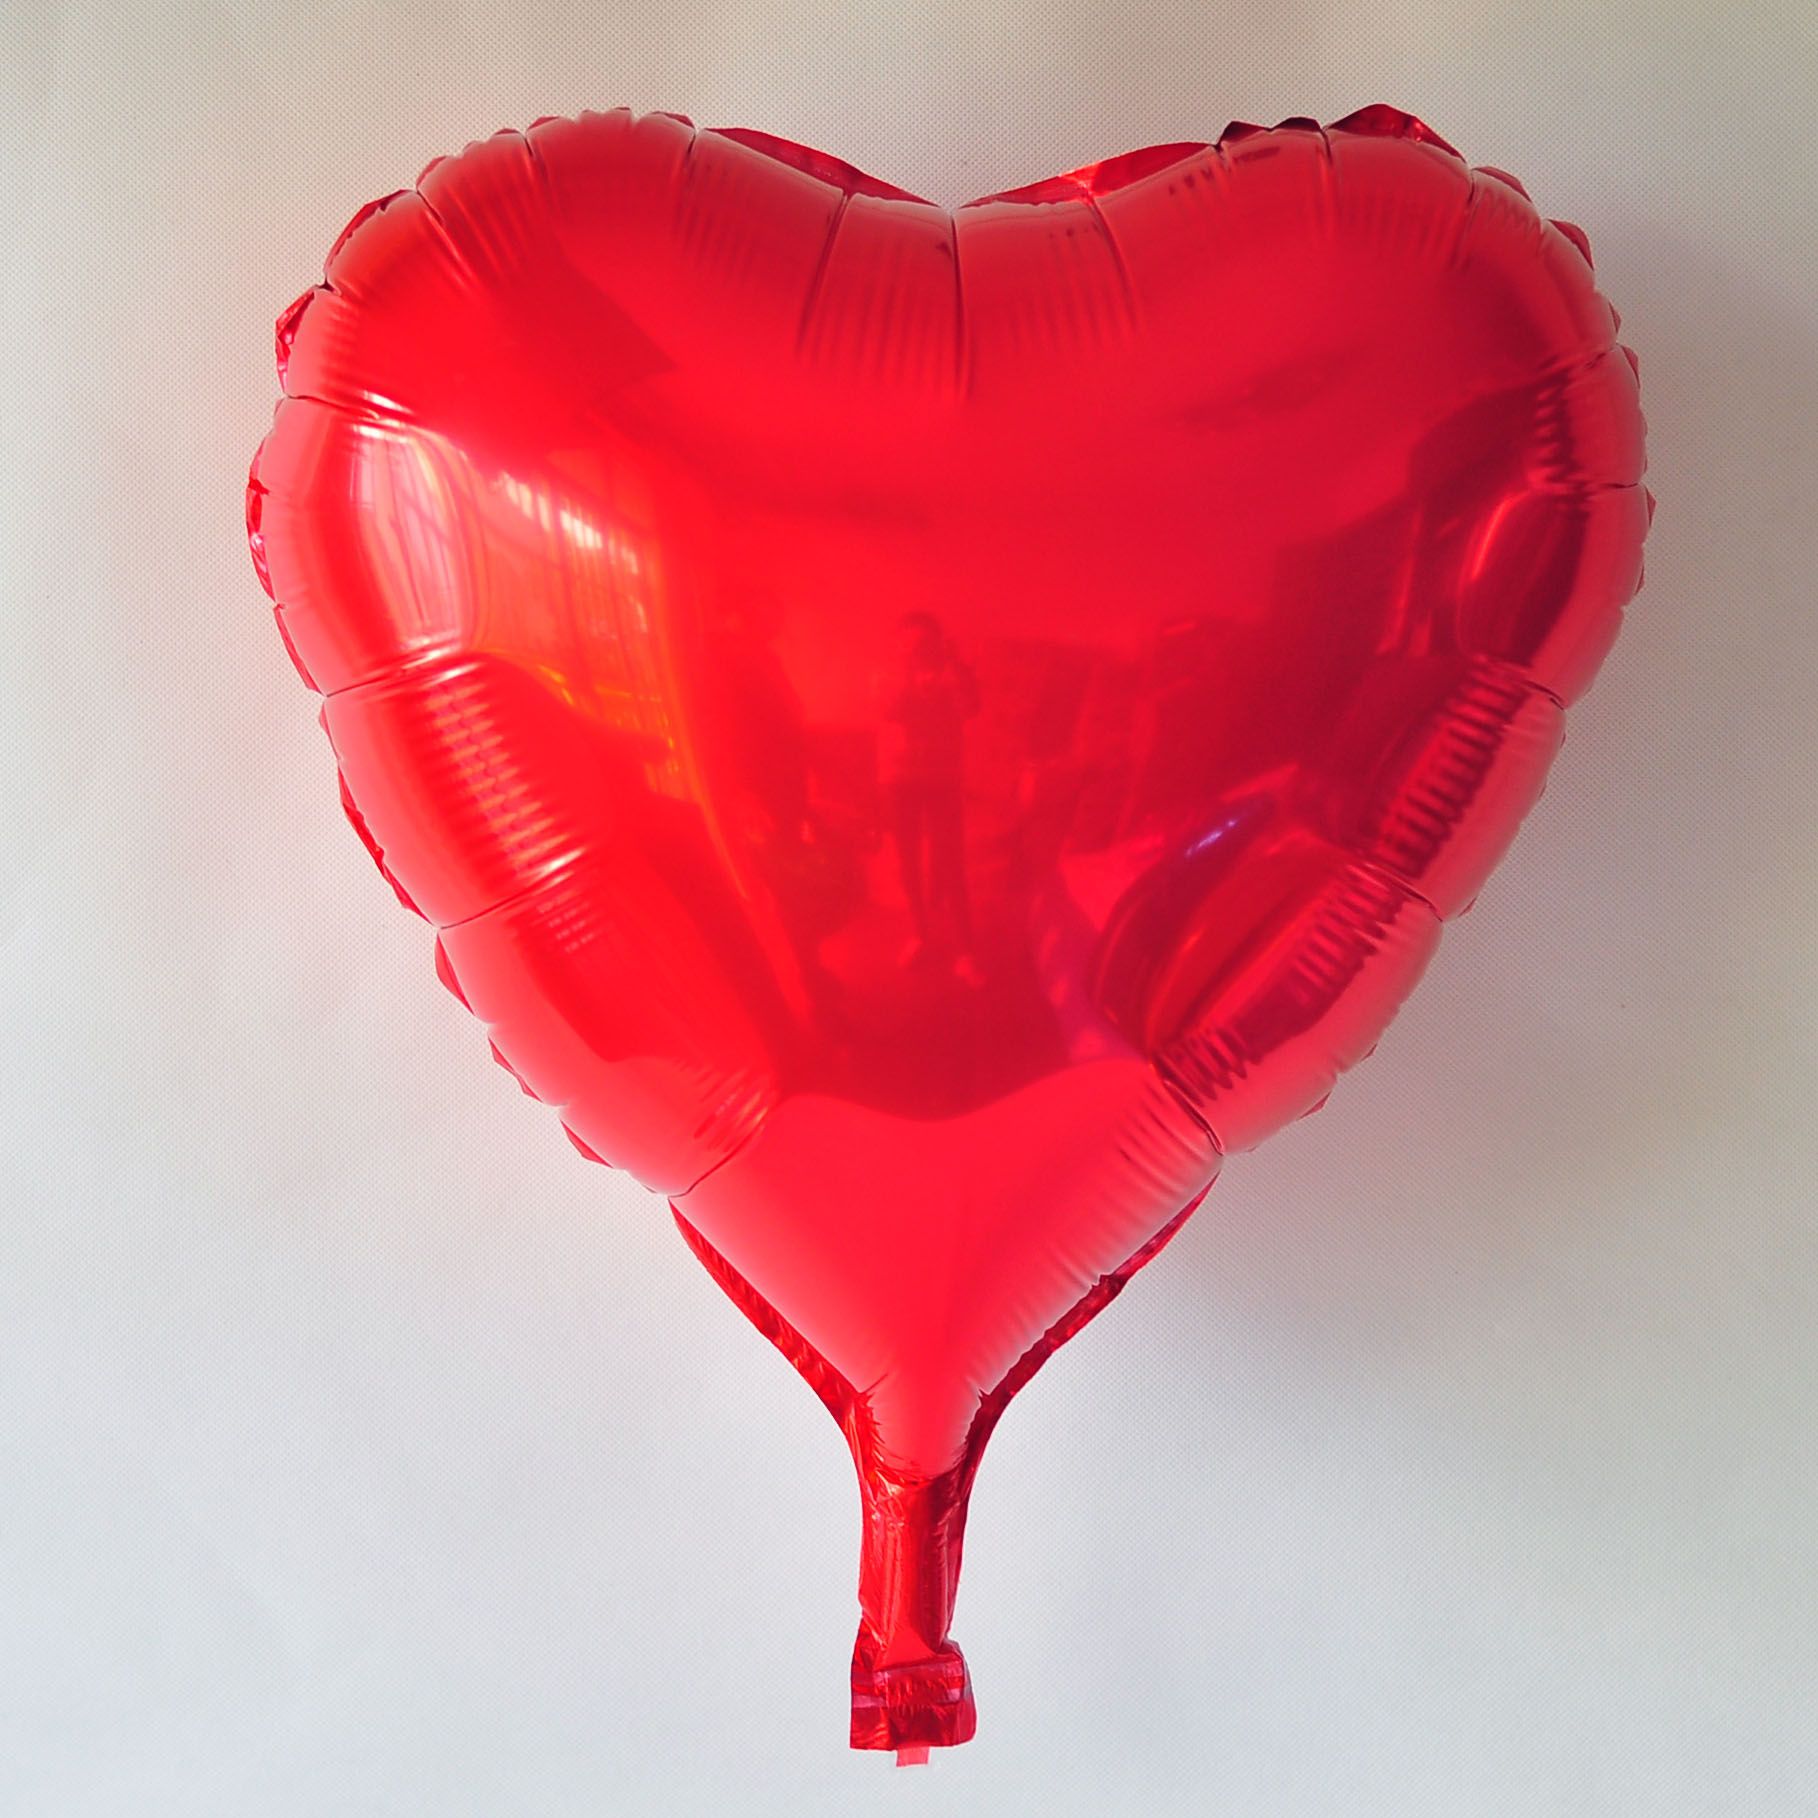 36 inch Red Heart Foil Balloons(90cm) sale on balloonsale.us | Heart ...